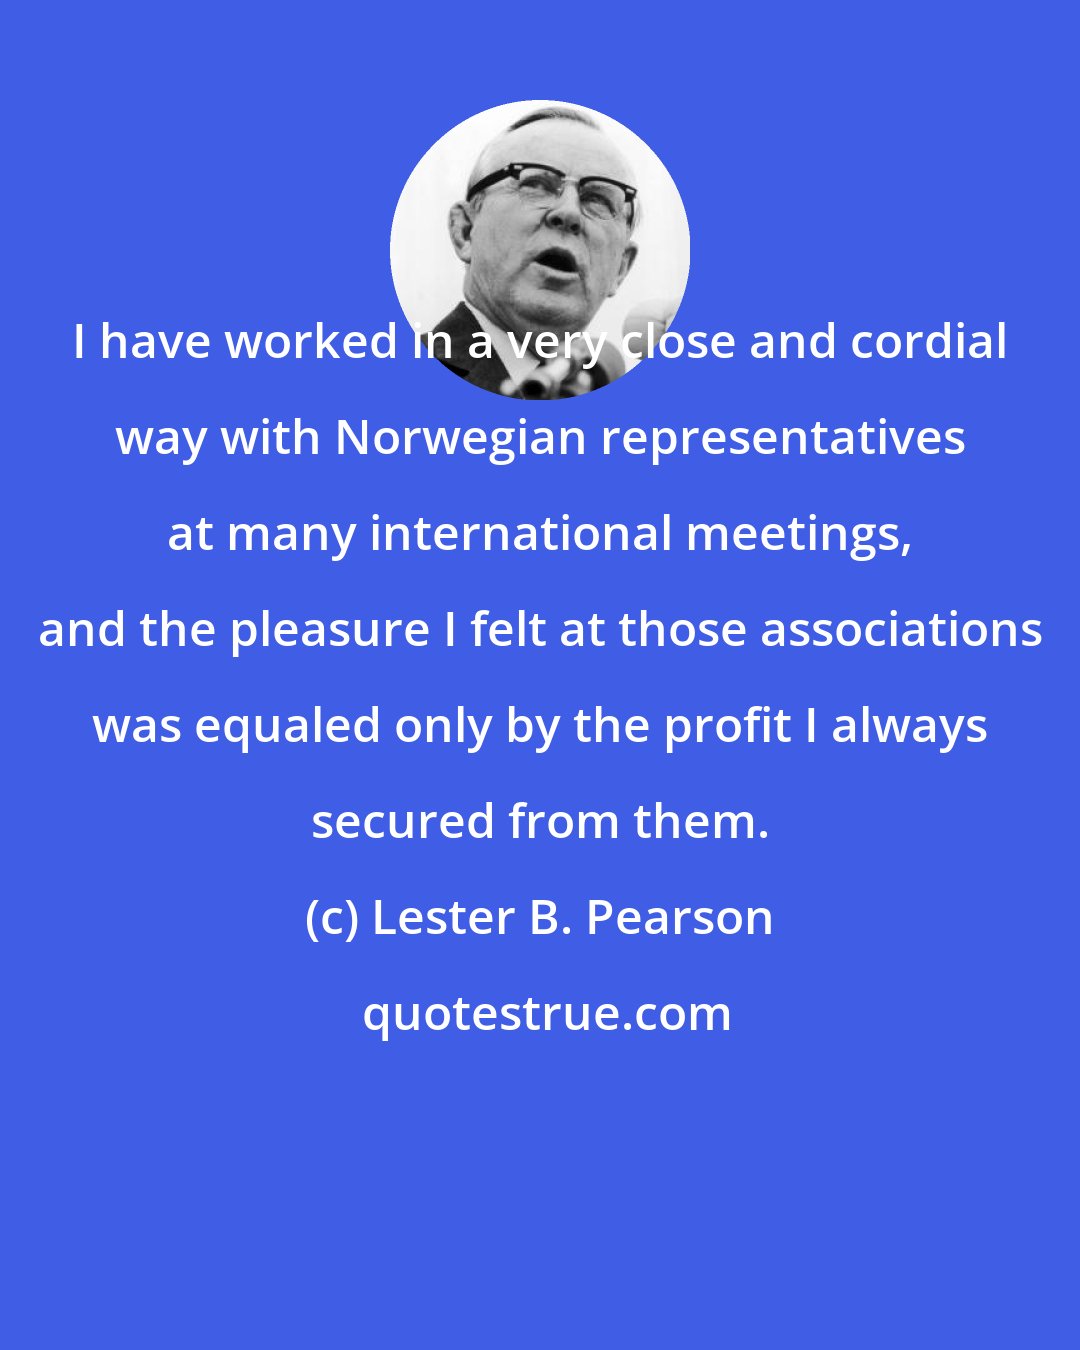 Lester B. Pearson: I have worked in a very close and cordial way with Norwegian representatives at many international meetings, and the pleasure I felt at those associations was equaled only by the profit I always secured from them.